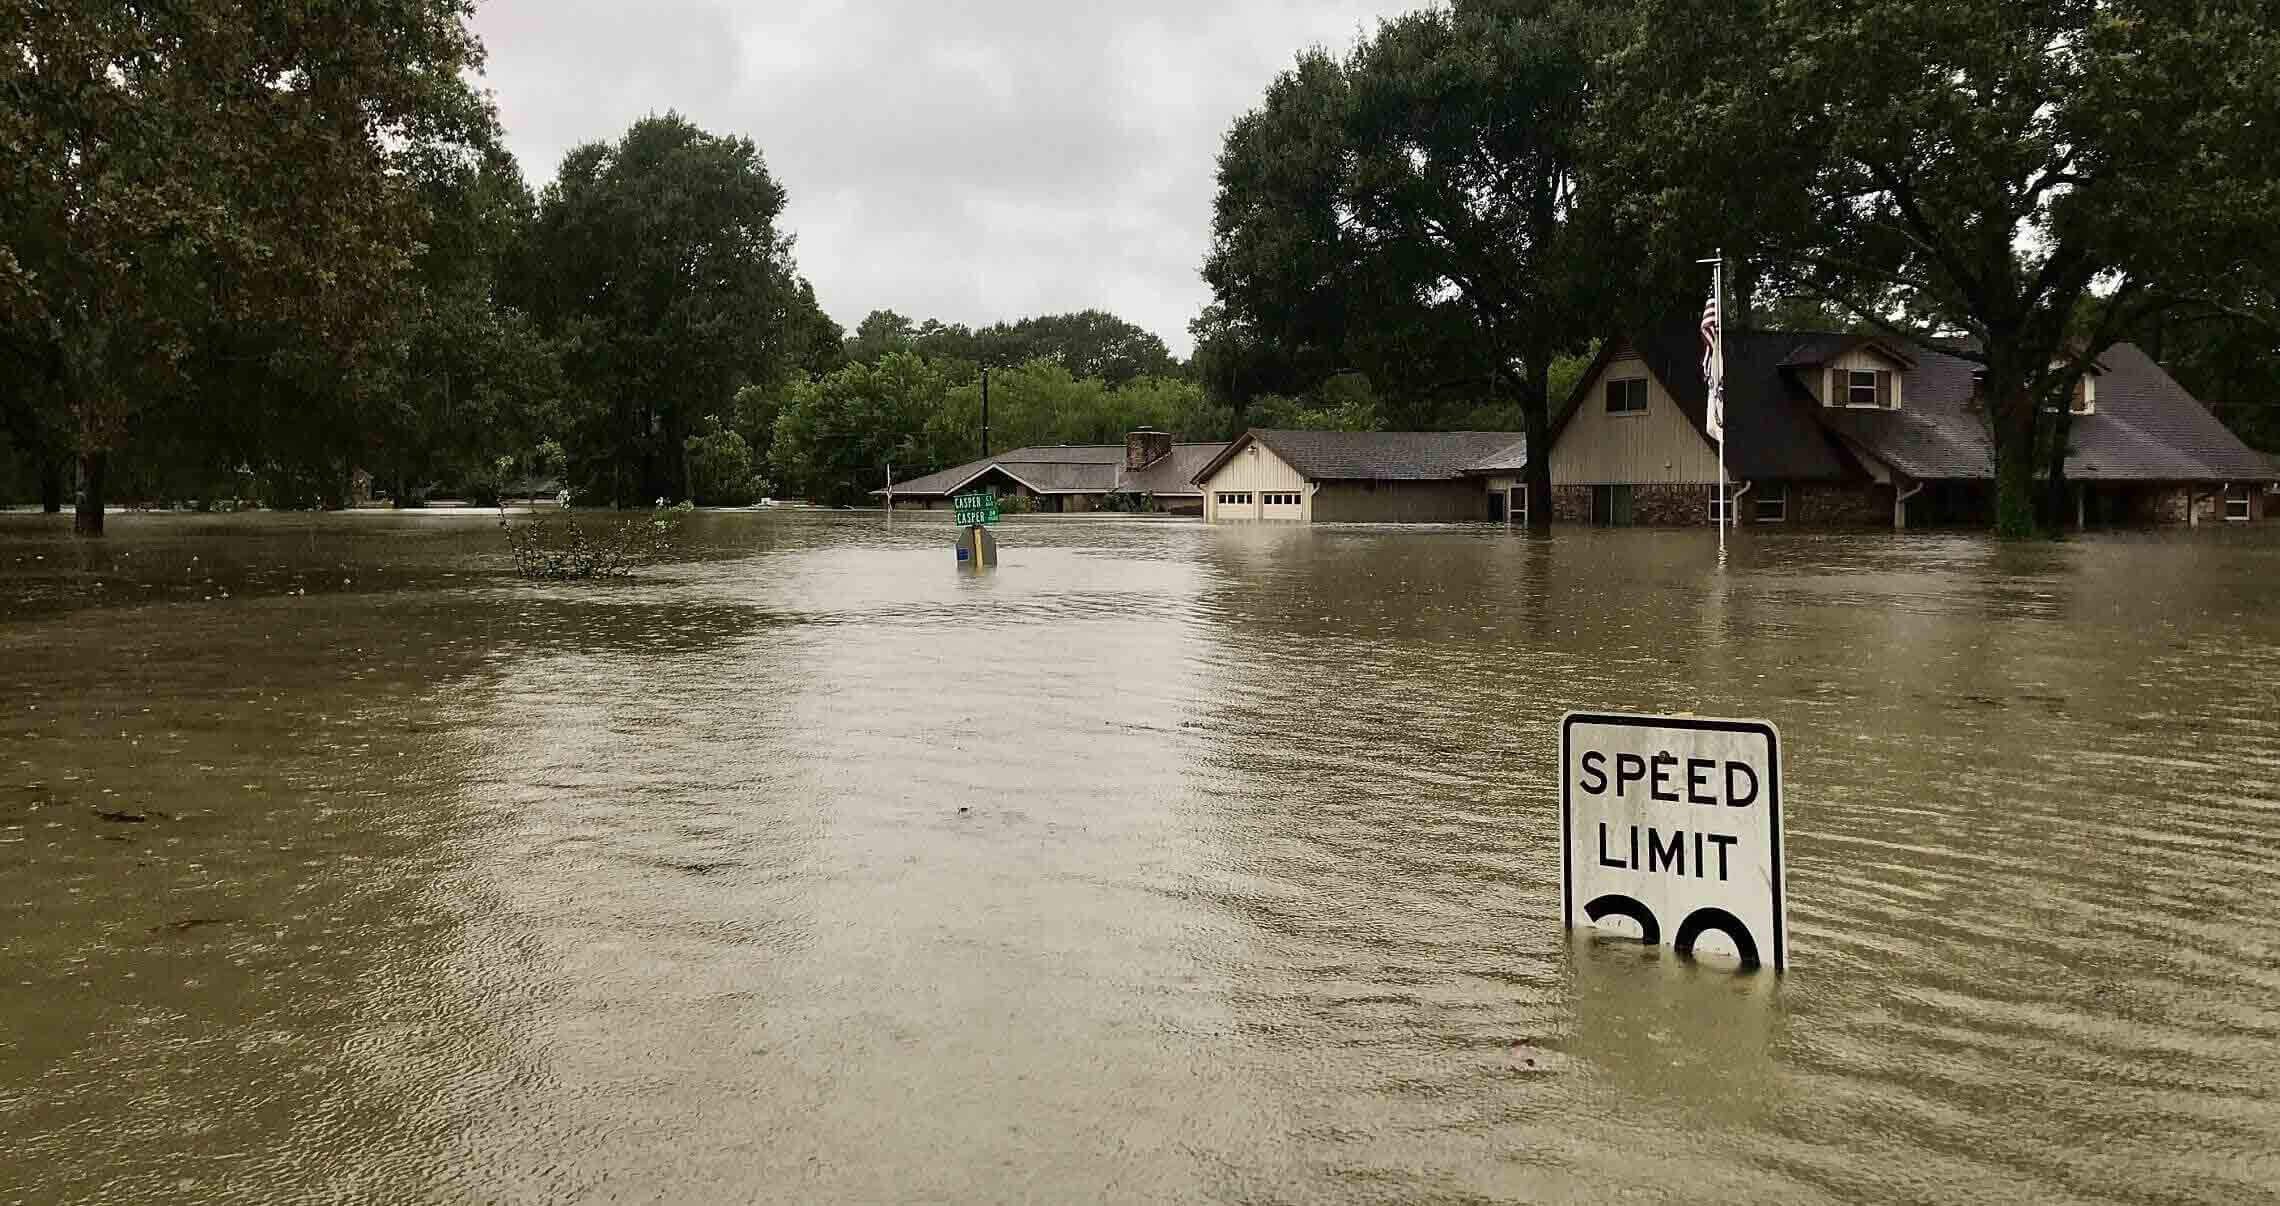 Does flood insurance cover hurricanes?